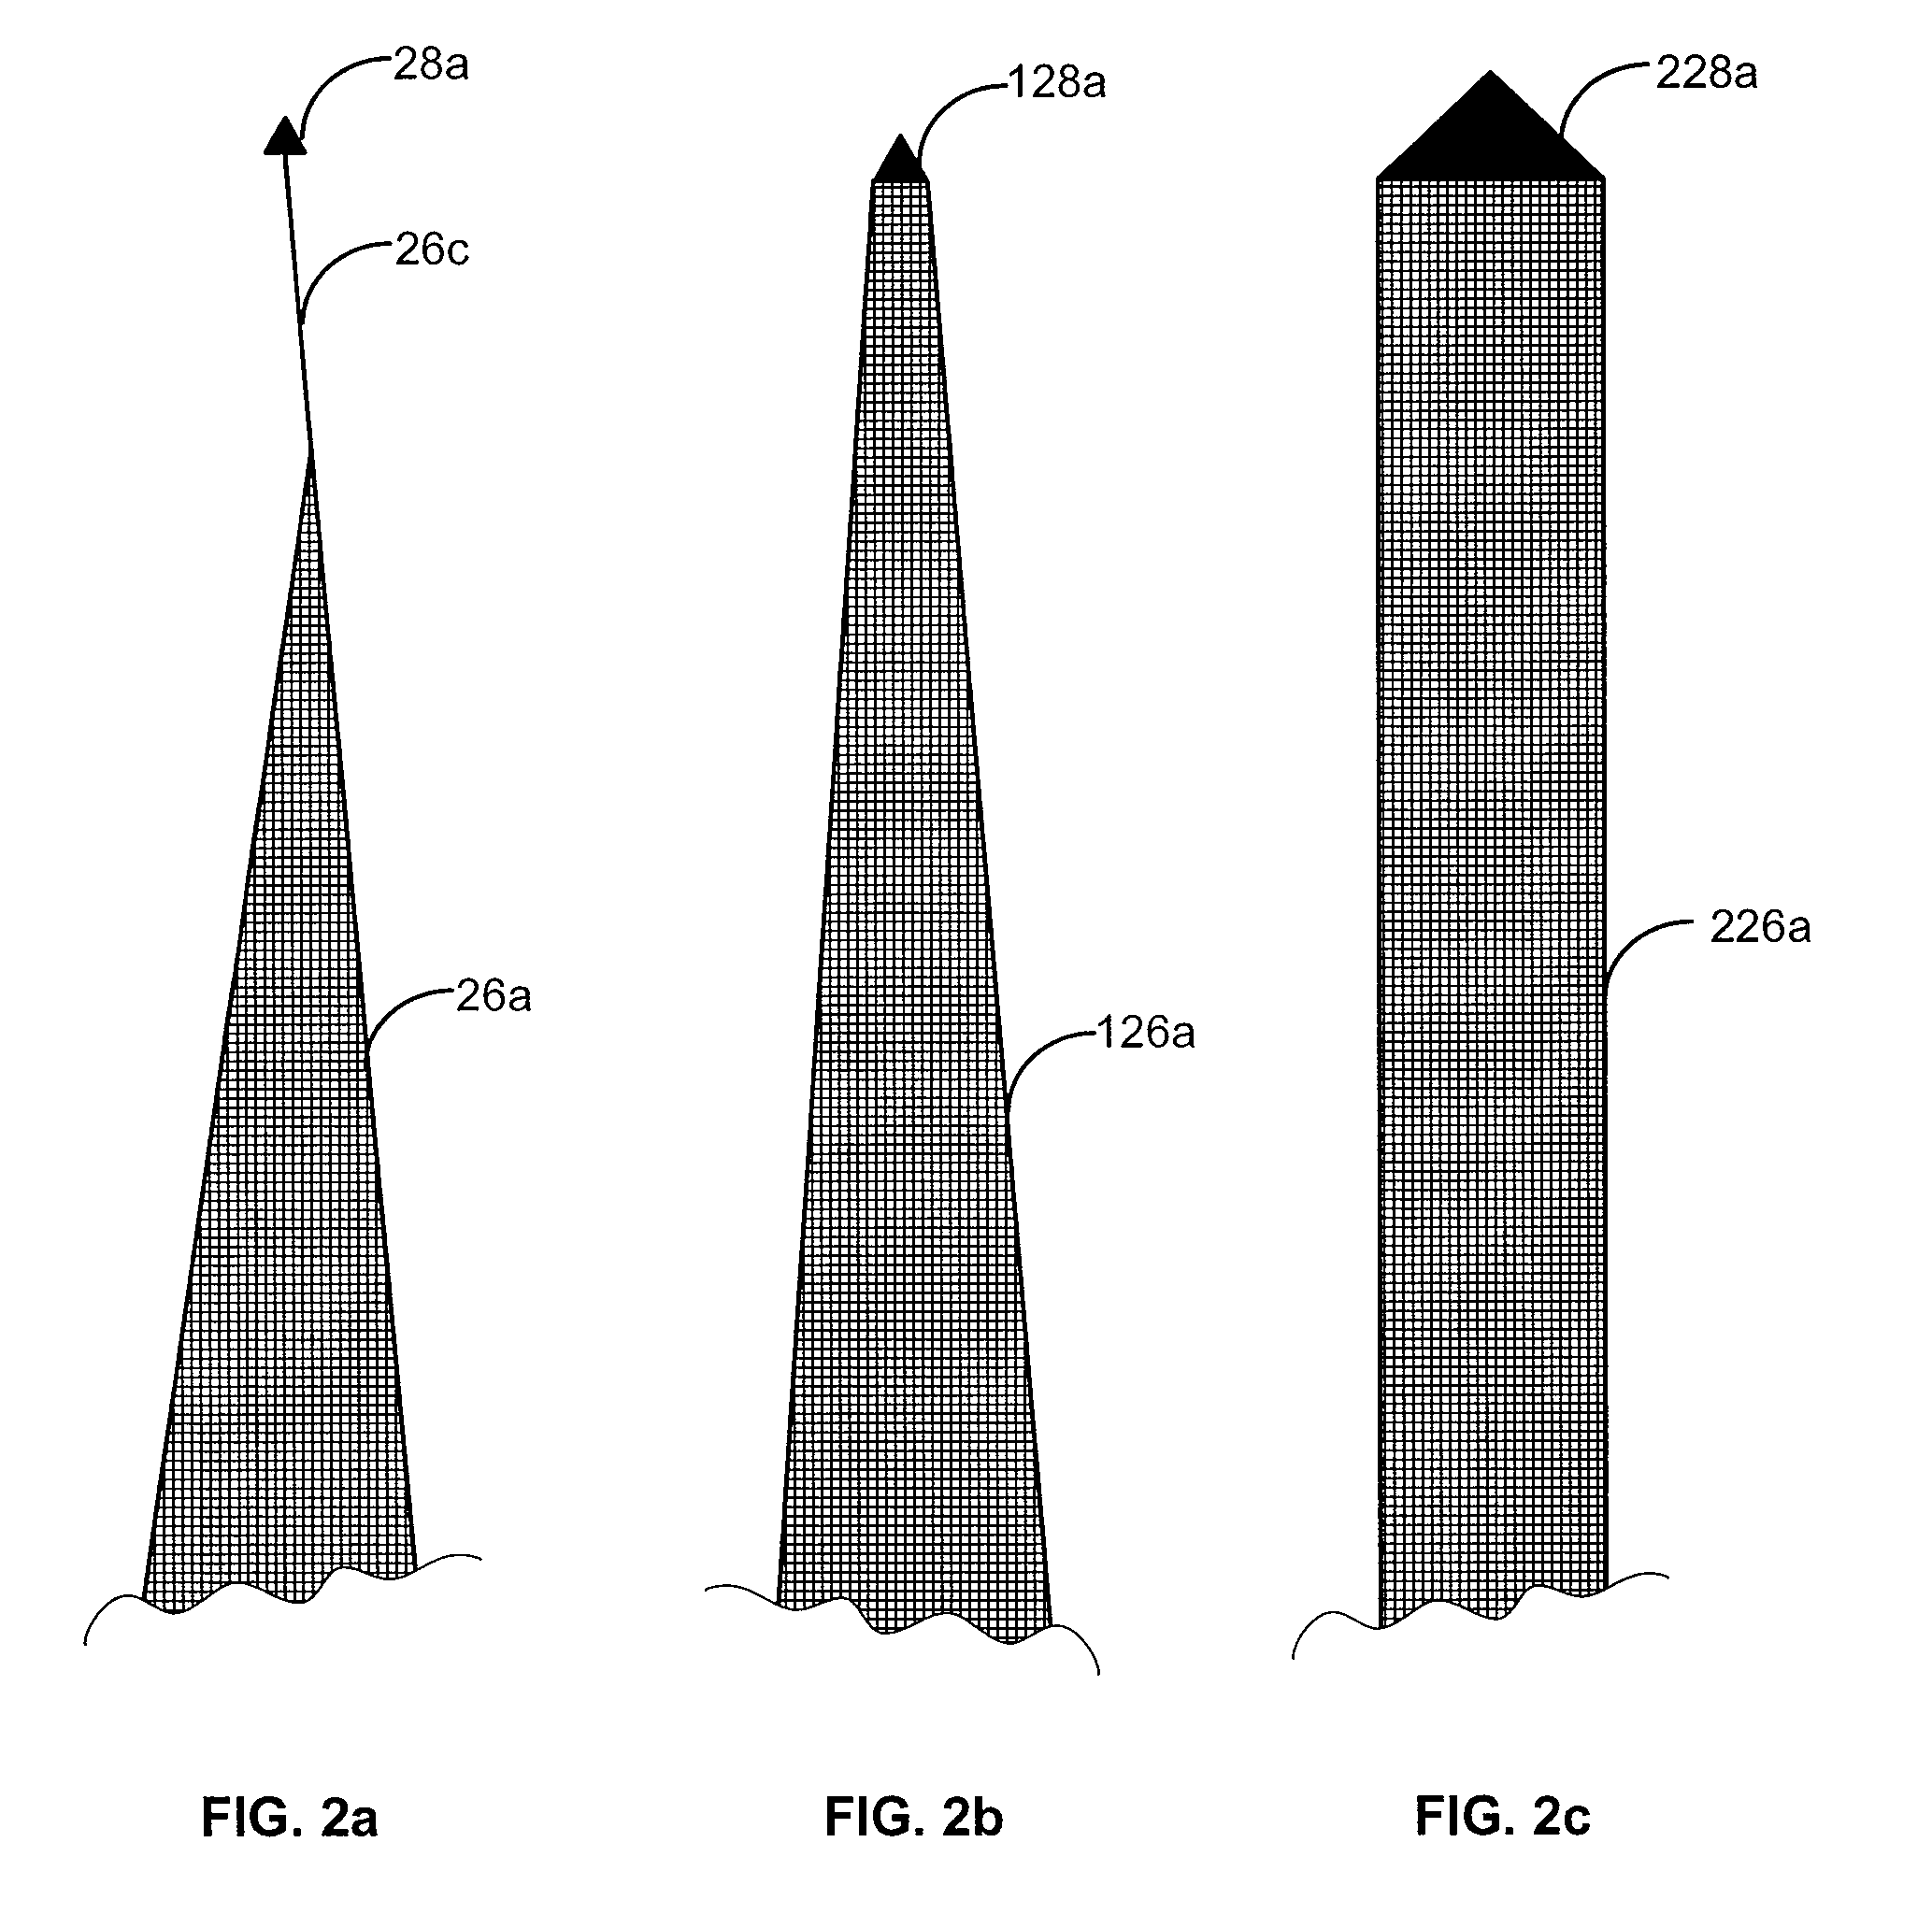 System and Method for Treating Tissue Wall Prolapse